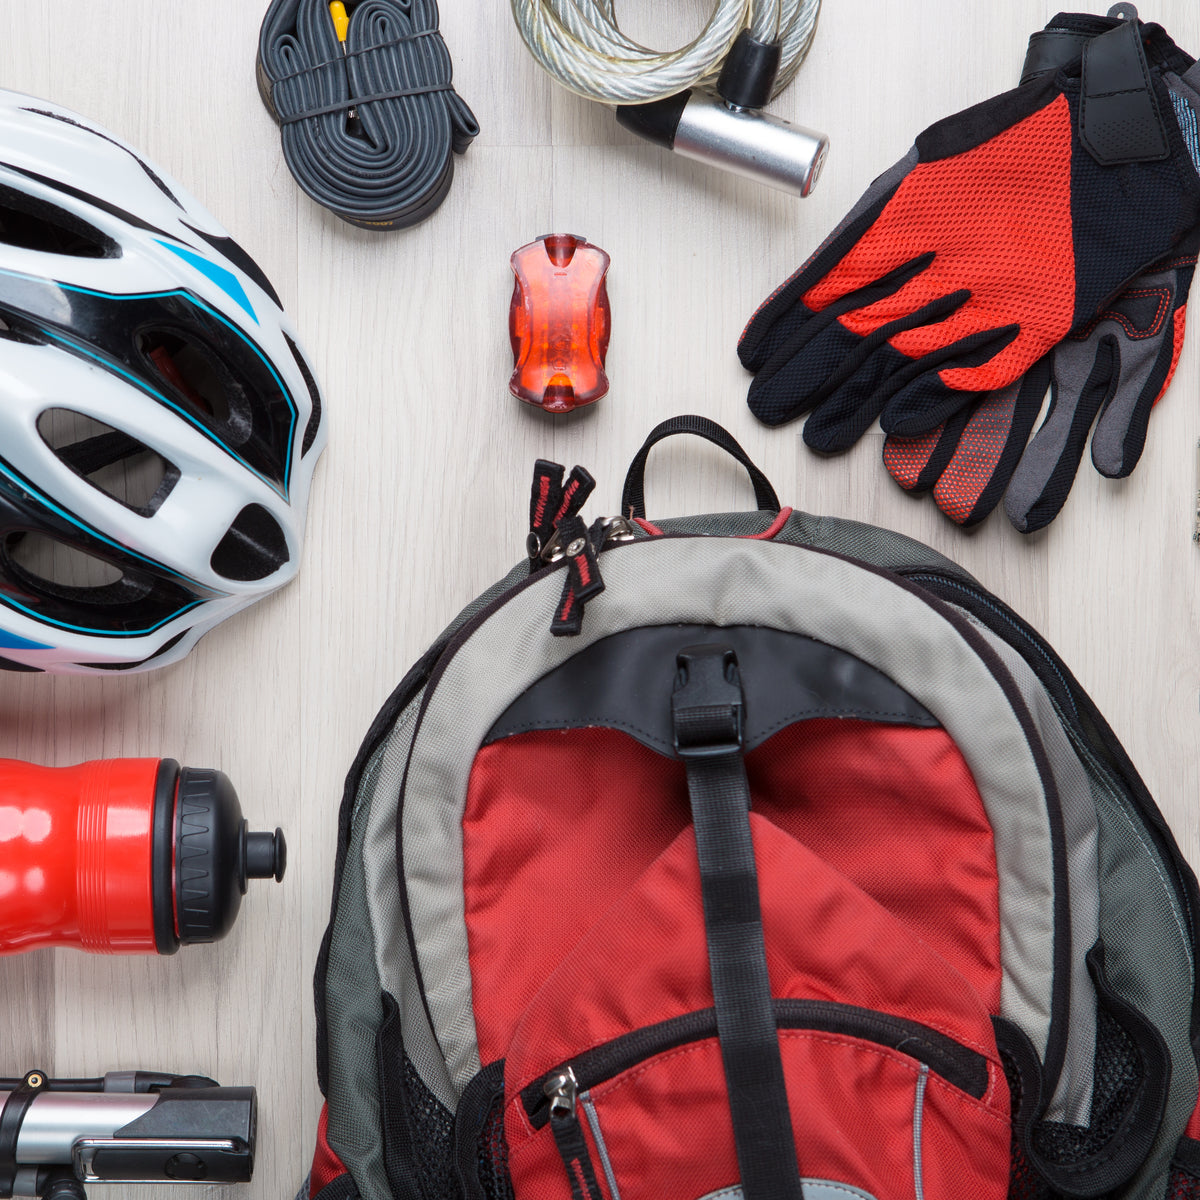 What Are The Best Bike Accessories For Summer Riding?